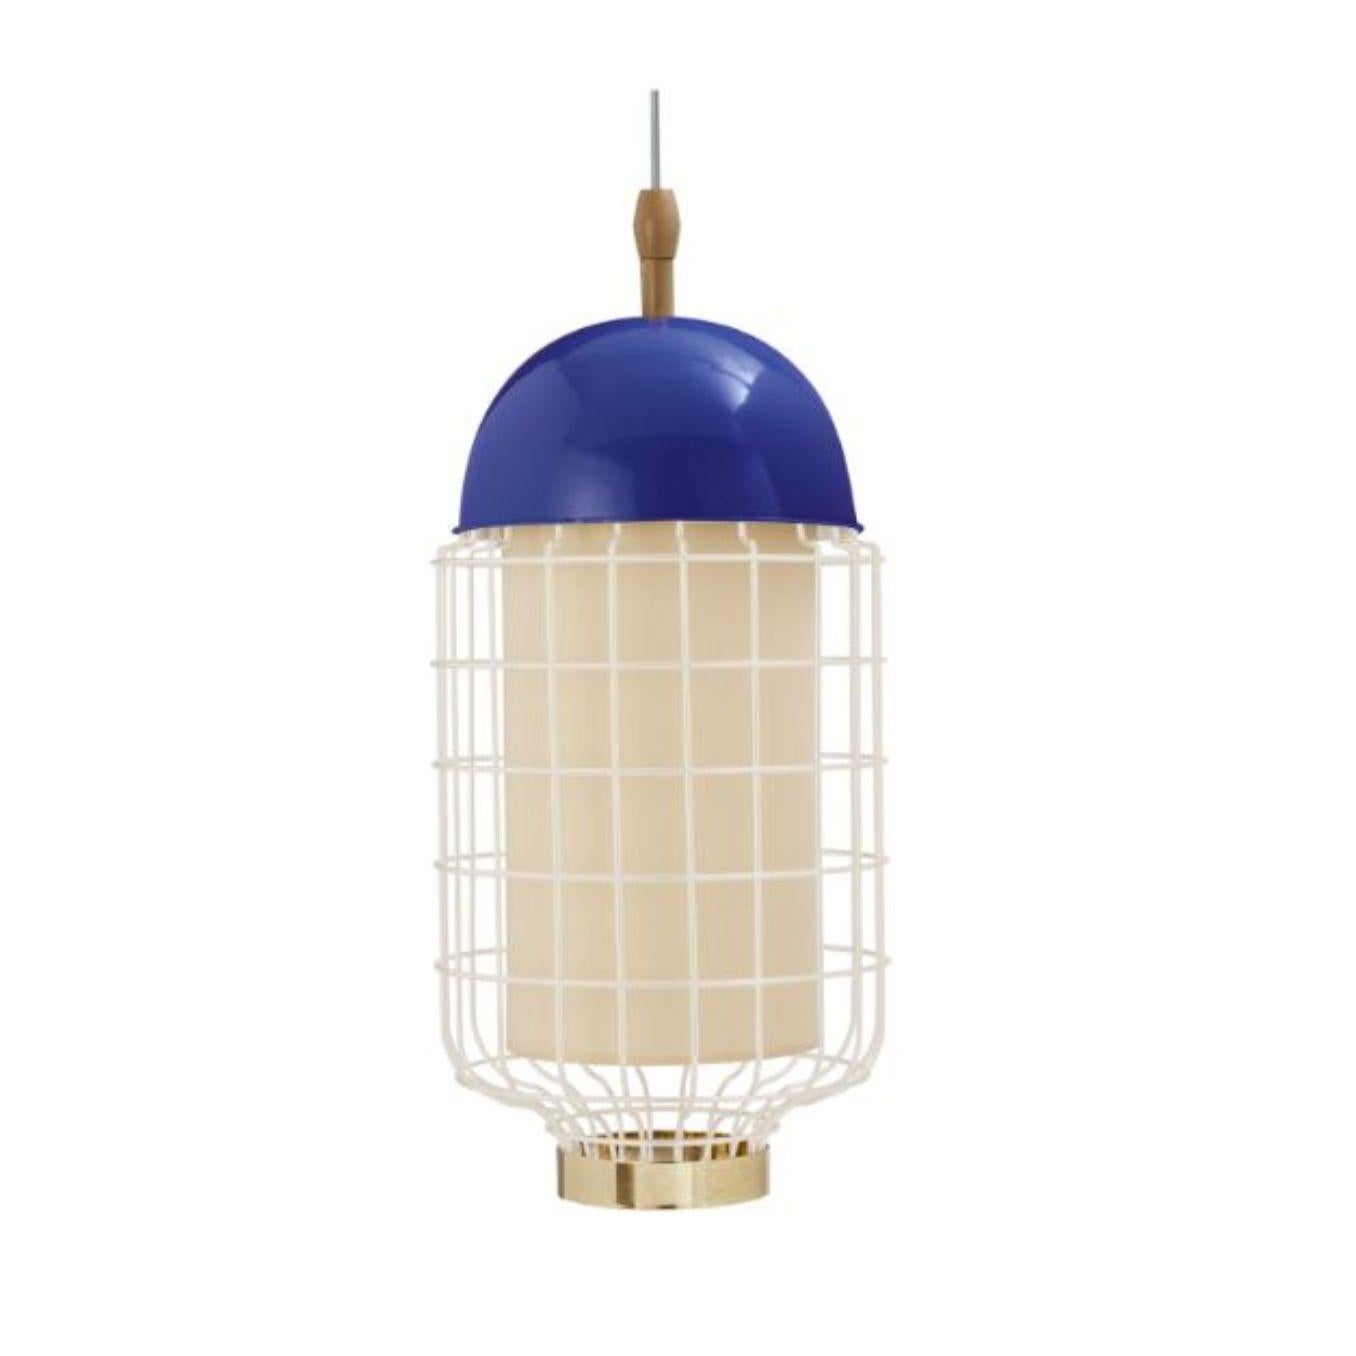 Cobalt Magnolia II suspension lamp with brass ring by Dooq.
Dimensions: W 27 x D 27 x H 59 cm.
Materials: lacquered metal, polished or brushed metal, brass.
abat-jour: cotton
Also available in different colours and materials.